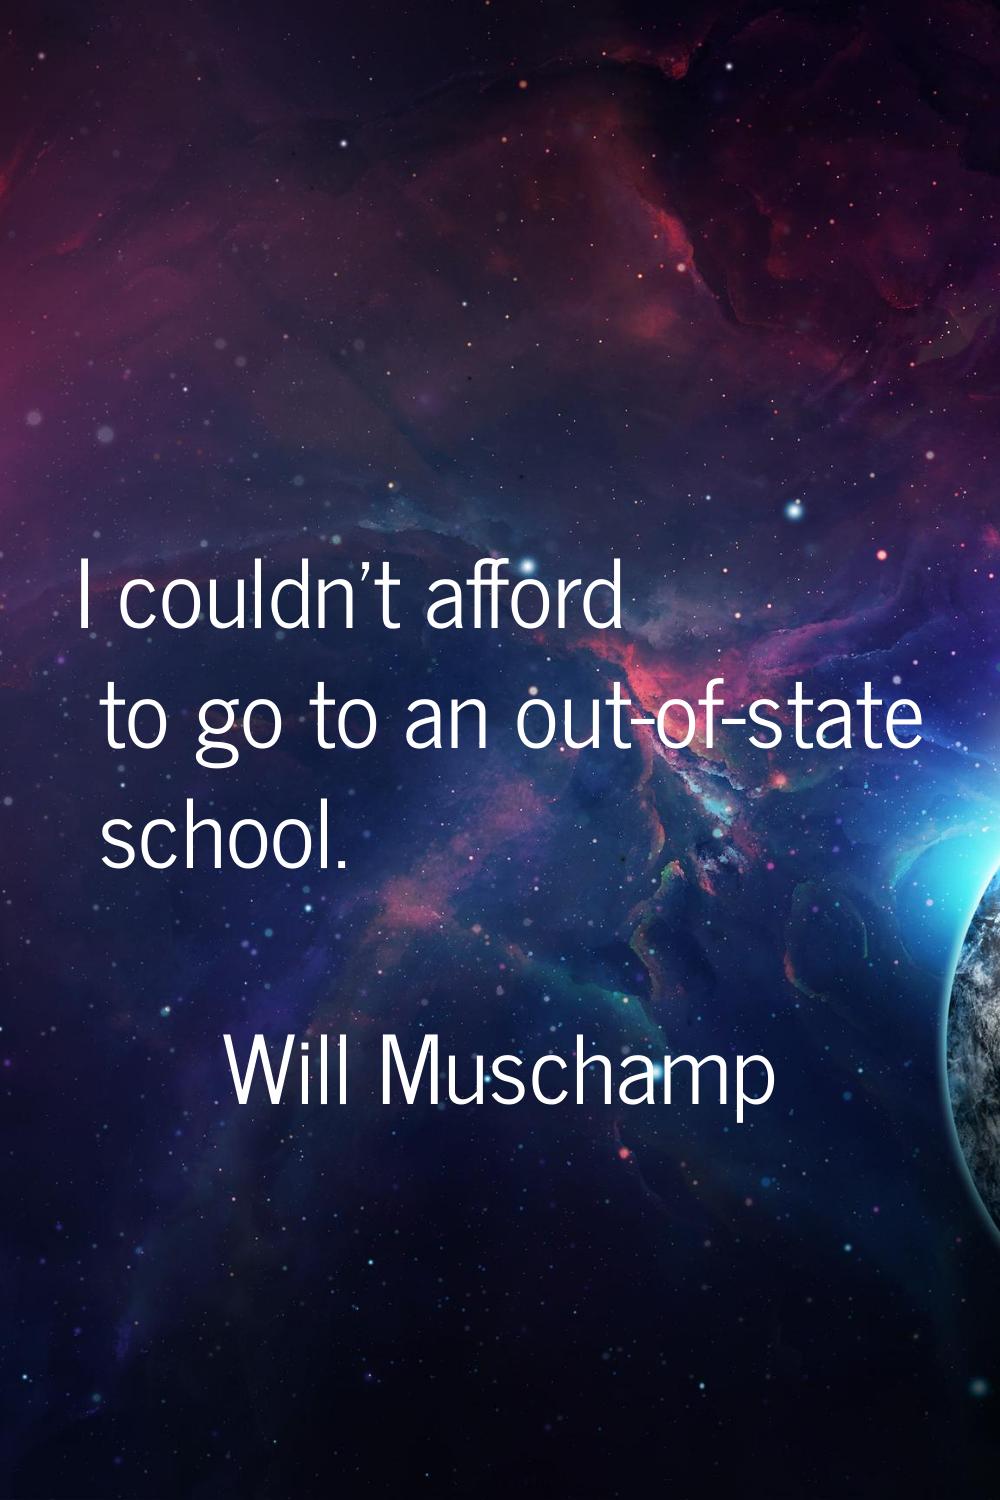 I couldn't afford to go to an out-of-state school.